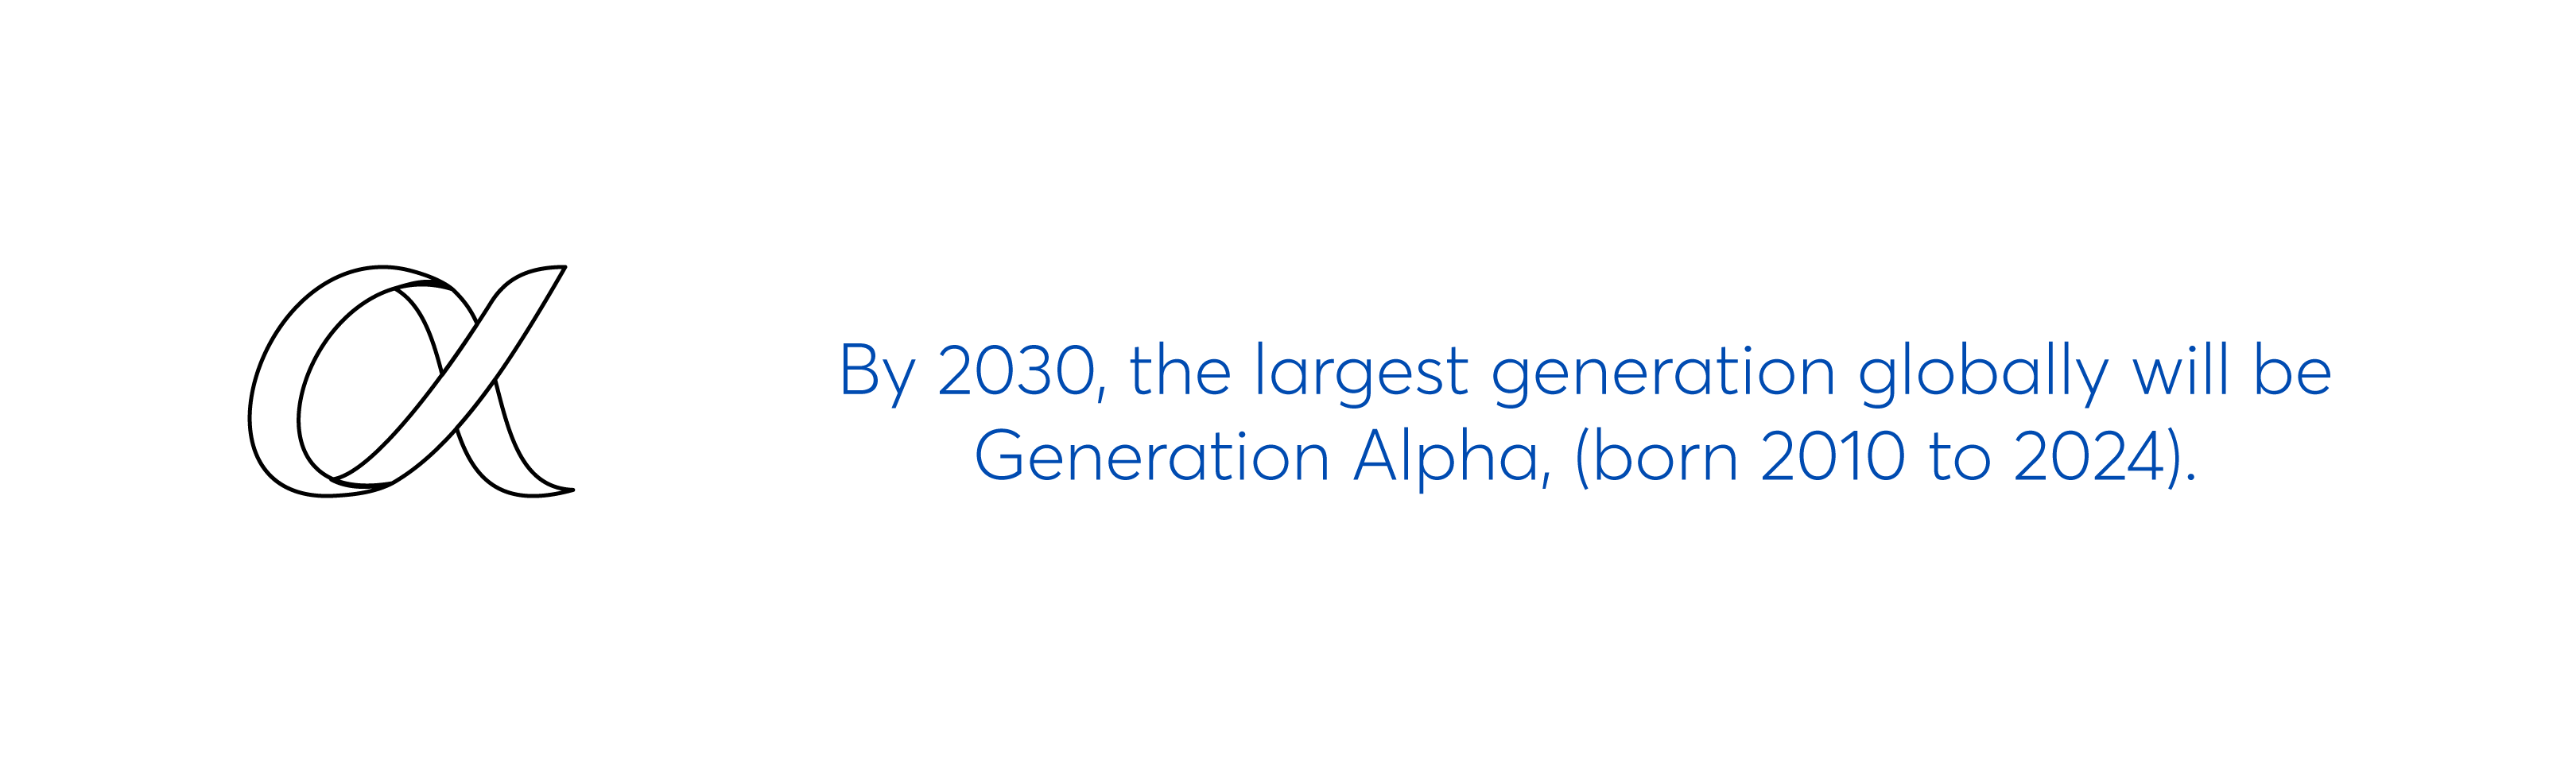 By 2030 the largest generation will be Gen Alpha